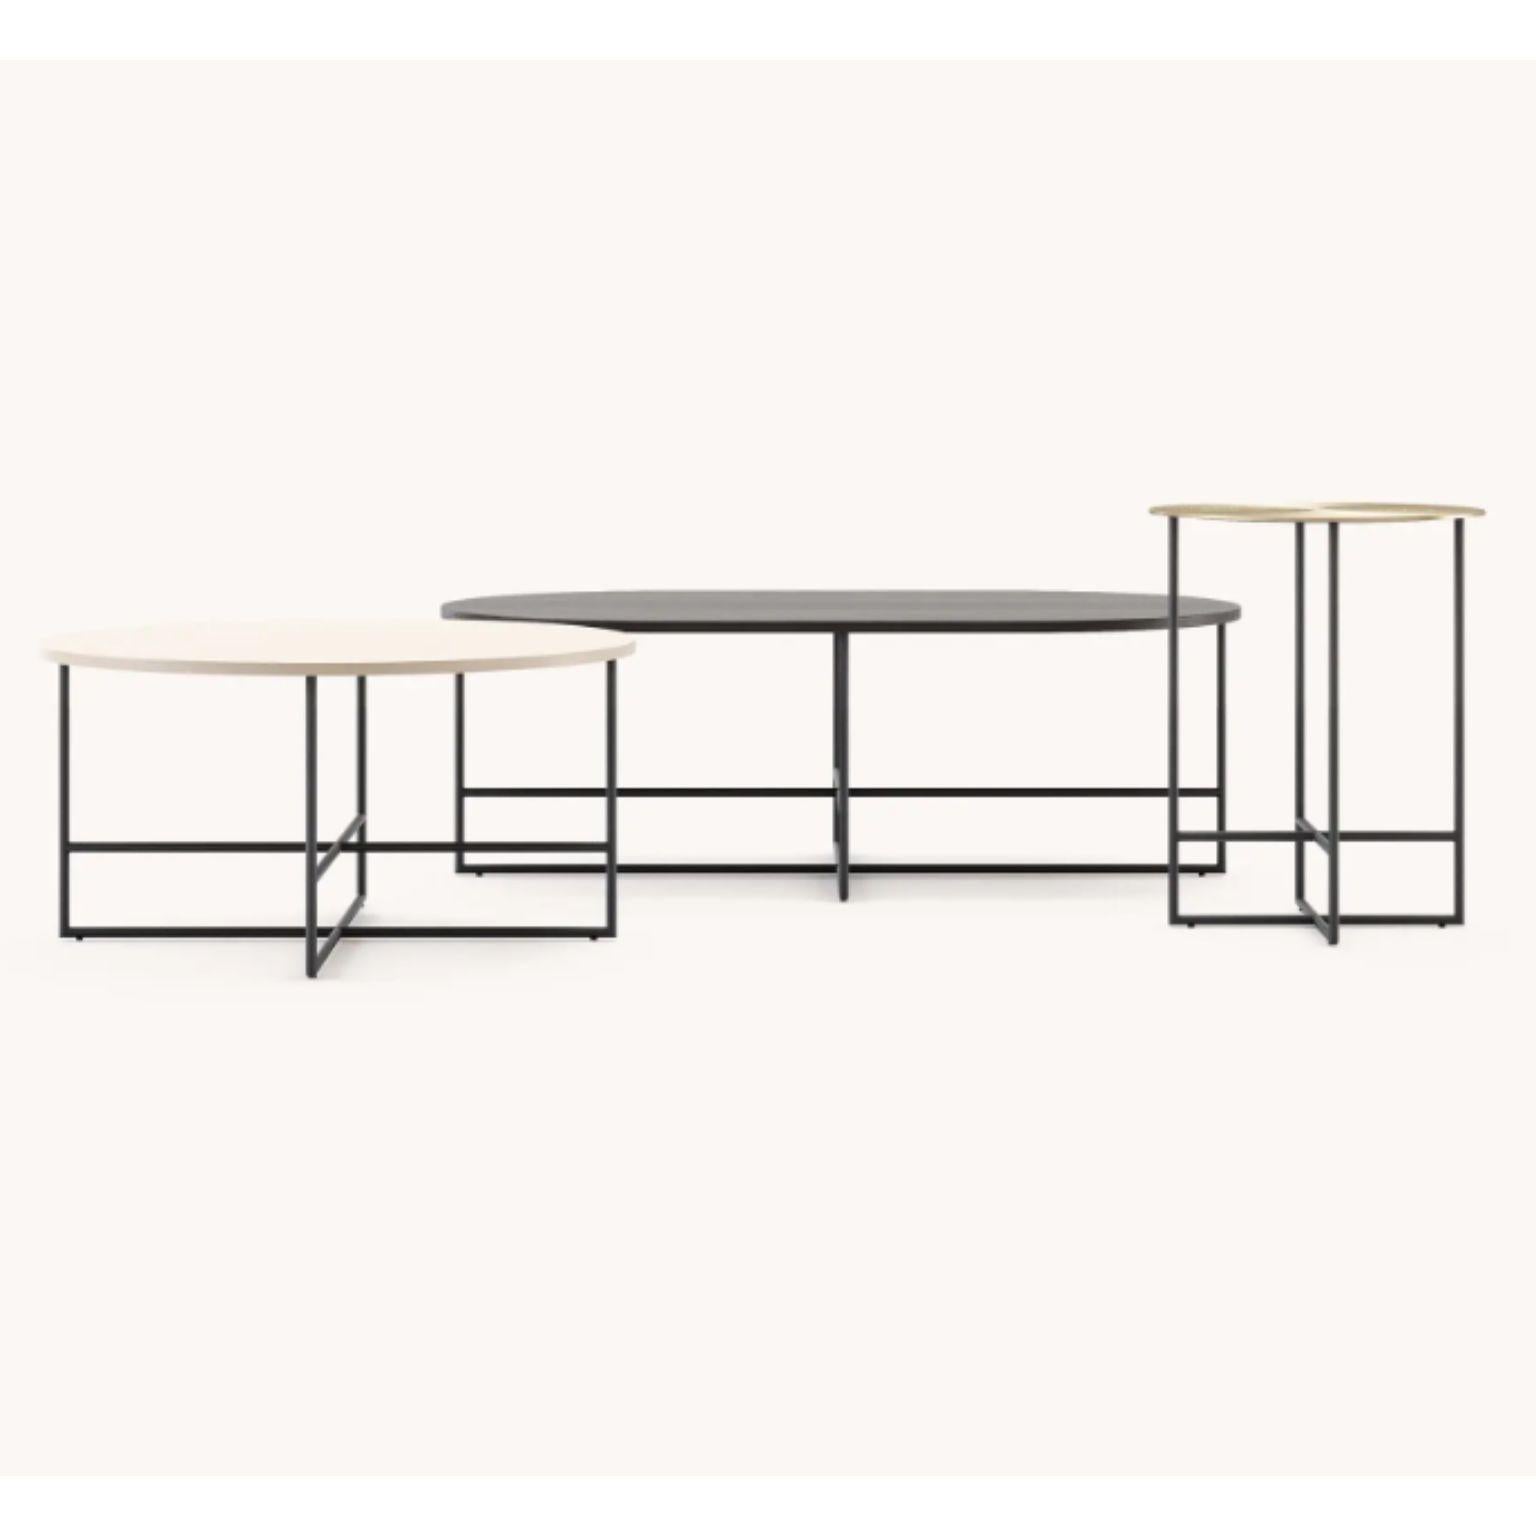 Contemporary Inside Center Table by Domkapa